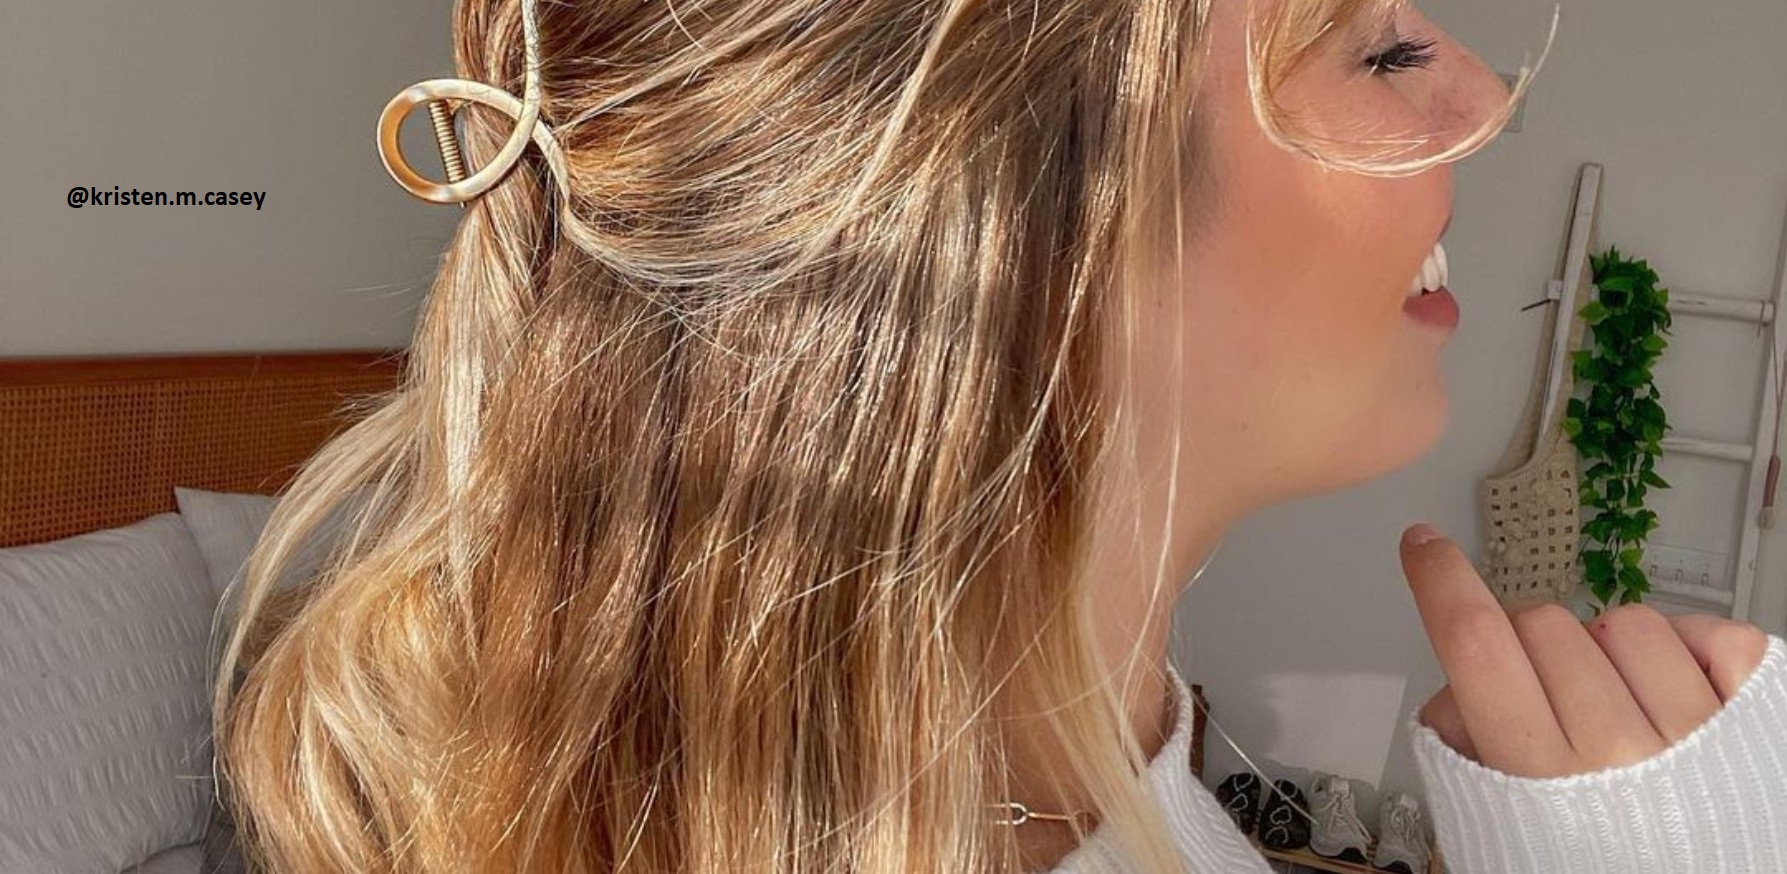 7 Timeless Classic Hairstyles for Spring That Are Effortlessly Elegant